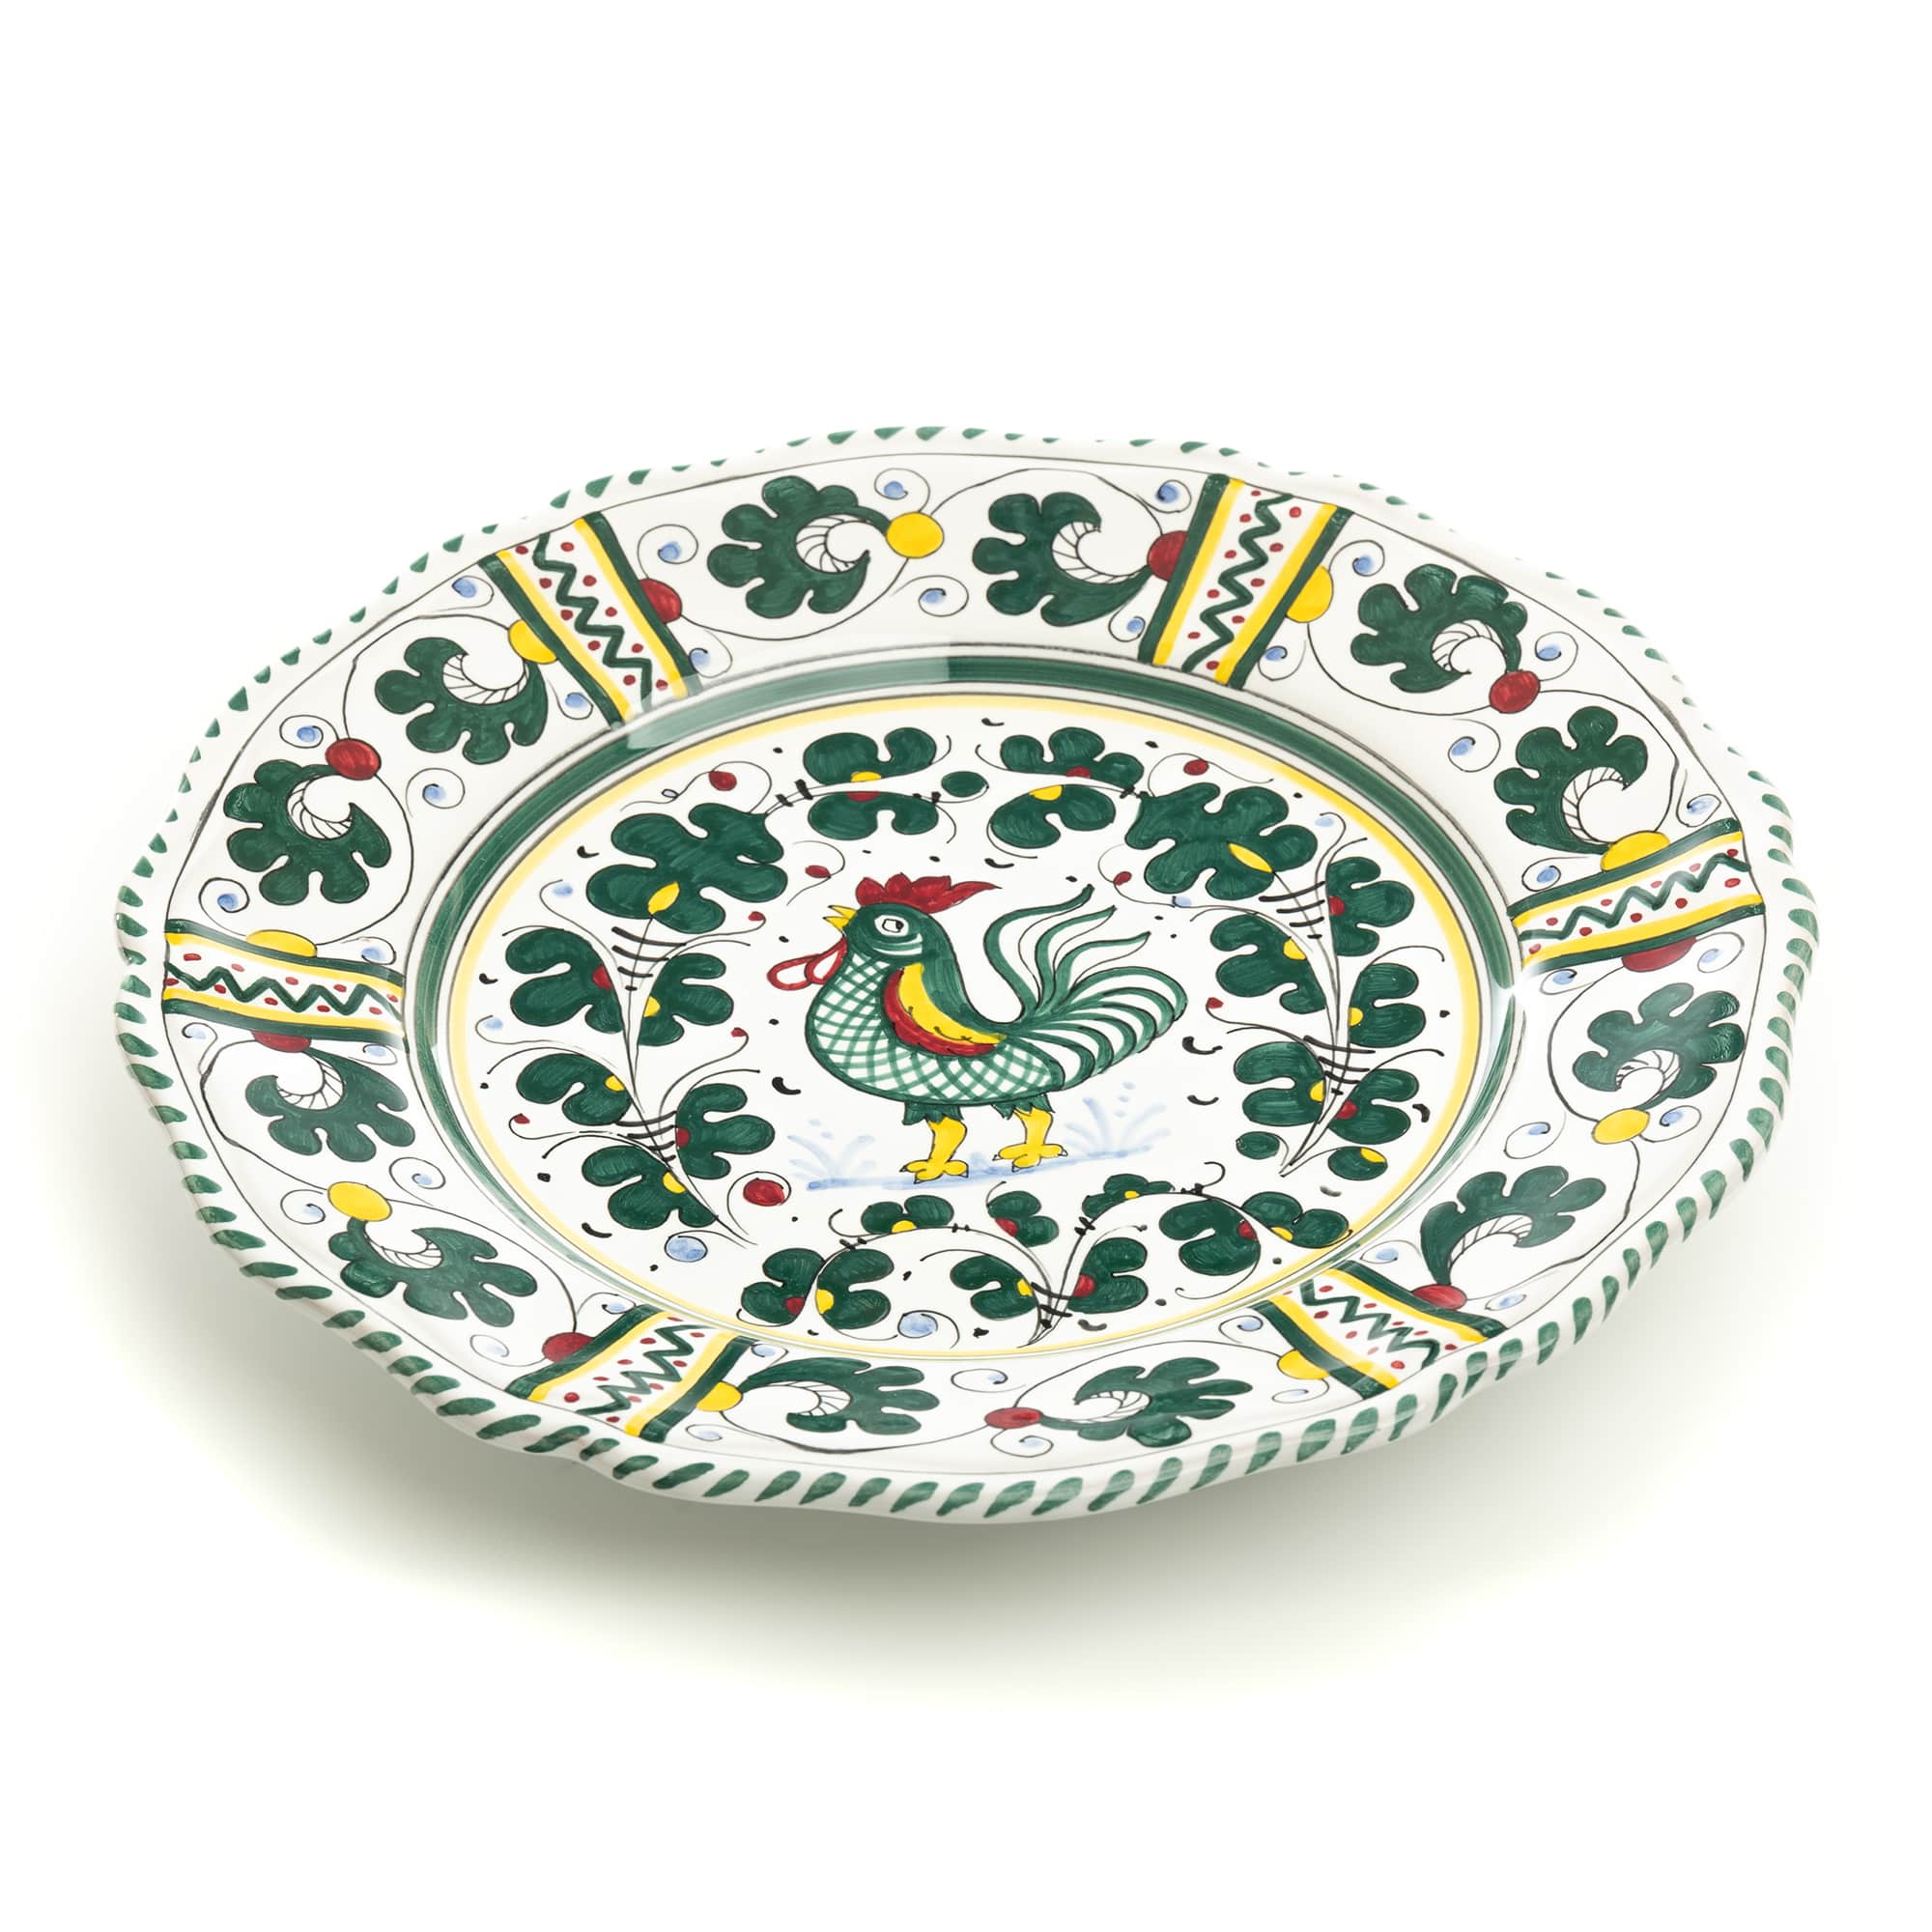 Orvieto Dinner Plate, Full Design - Set of 8, ceramics, pottery, italian design, majolica, handmade, handcrafted, handpainted, home decor, kitchen art, home goods, deruta, majolica, Artisan, treasures, traditional art, modern art, gift ideas, style, SF, shop small business, artists, shop online, landmark store, legacy, one of a kind, limited edition, gift guide, gift shop, retail shop, decorations, shopping, italy, home staging, home decorating, home interiors